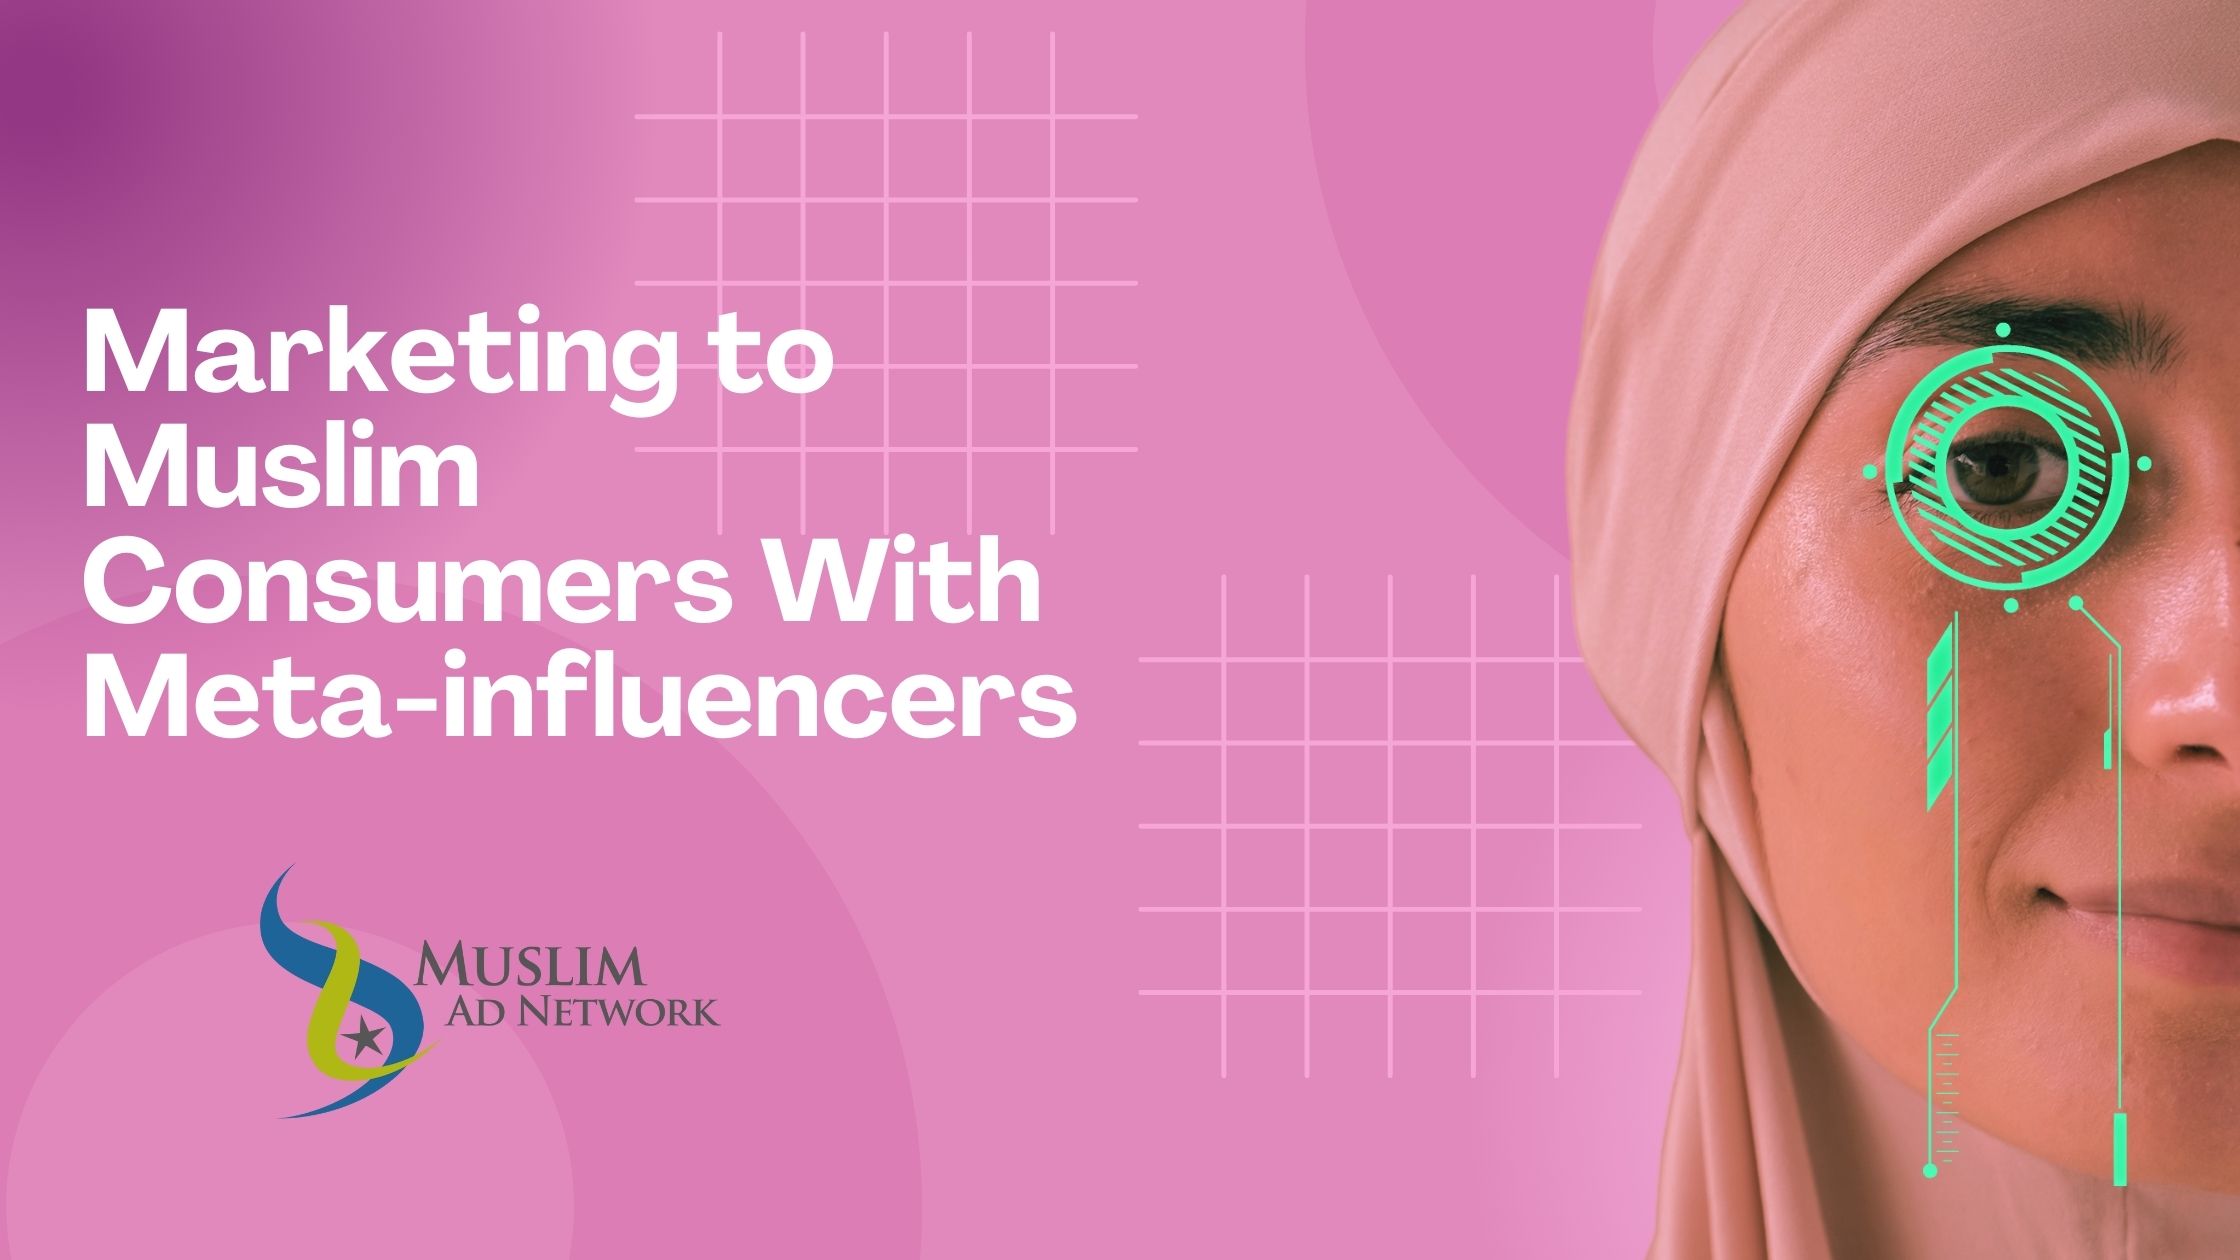 Marketing to Muslim Consumers With Meta-influencers